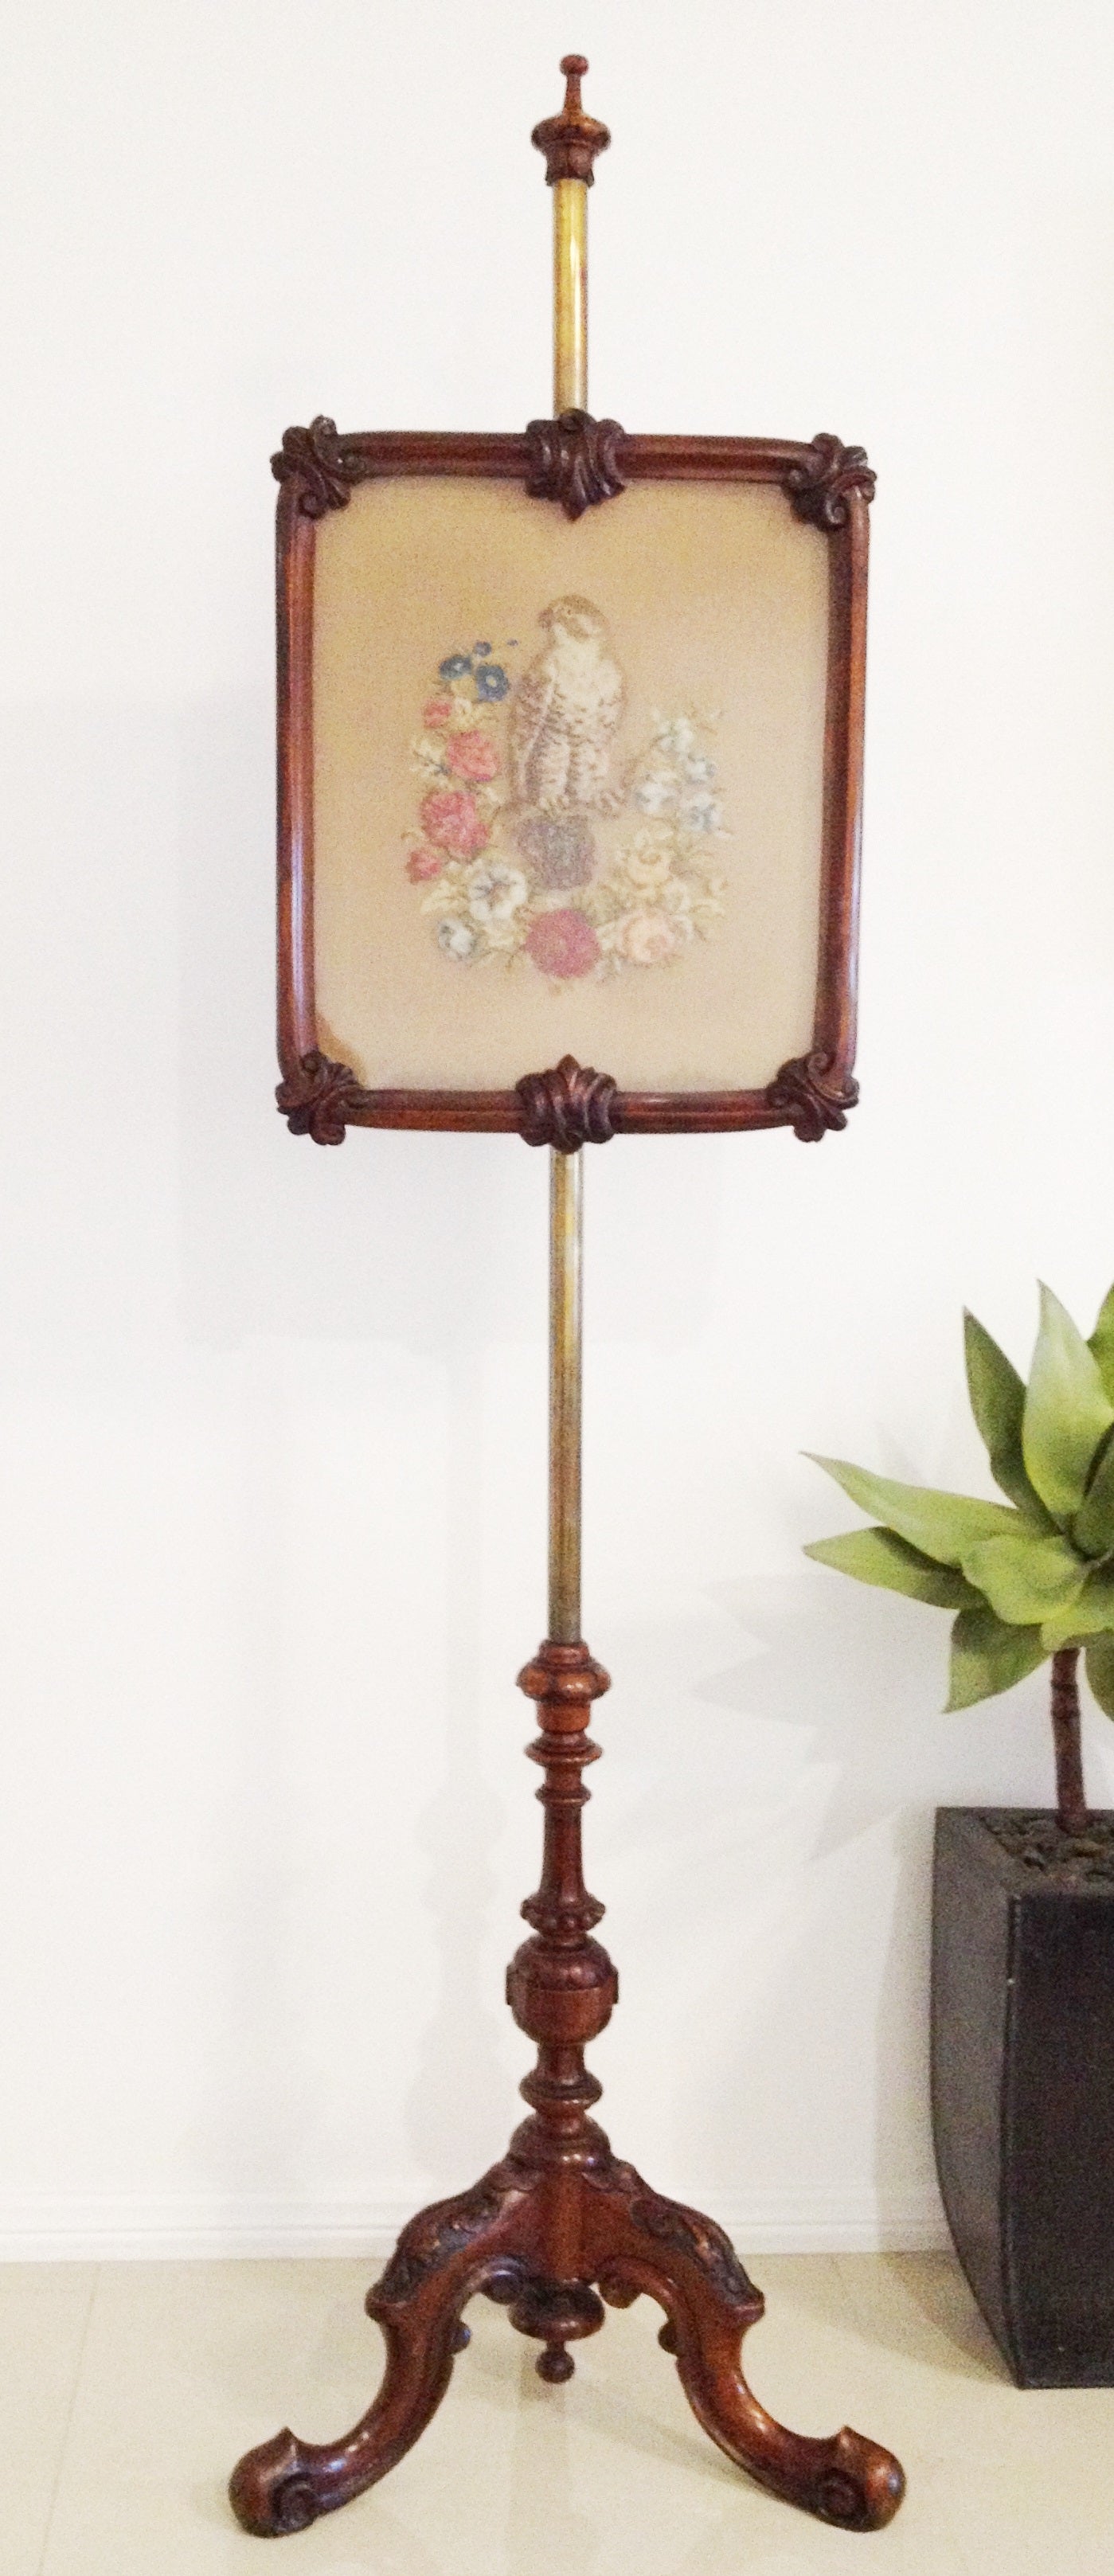 Antique Fire Screen Stand | eXibit collection